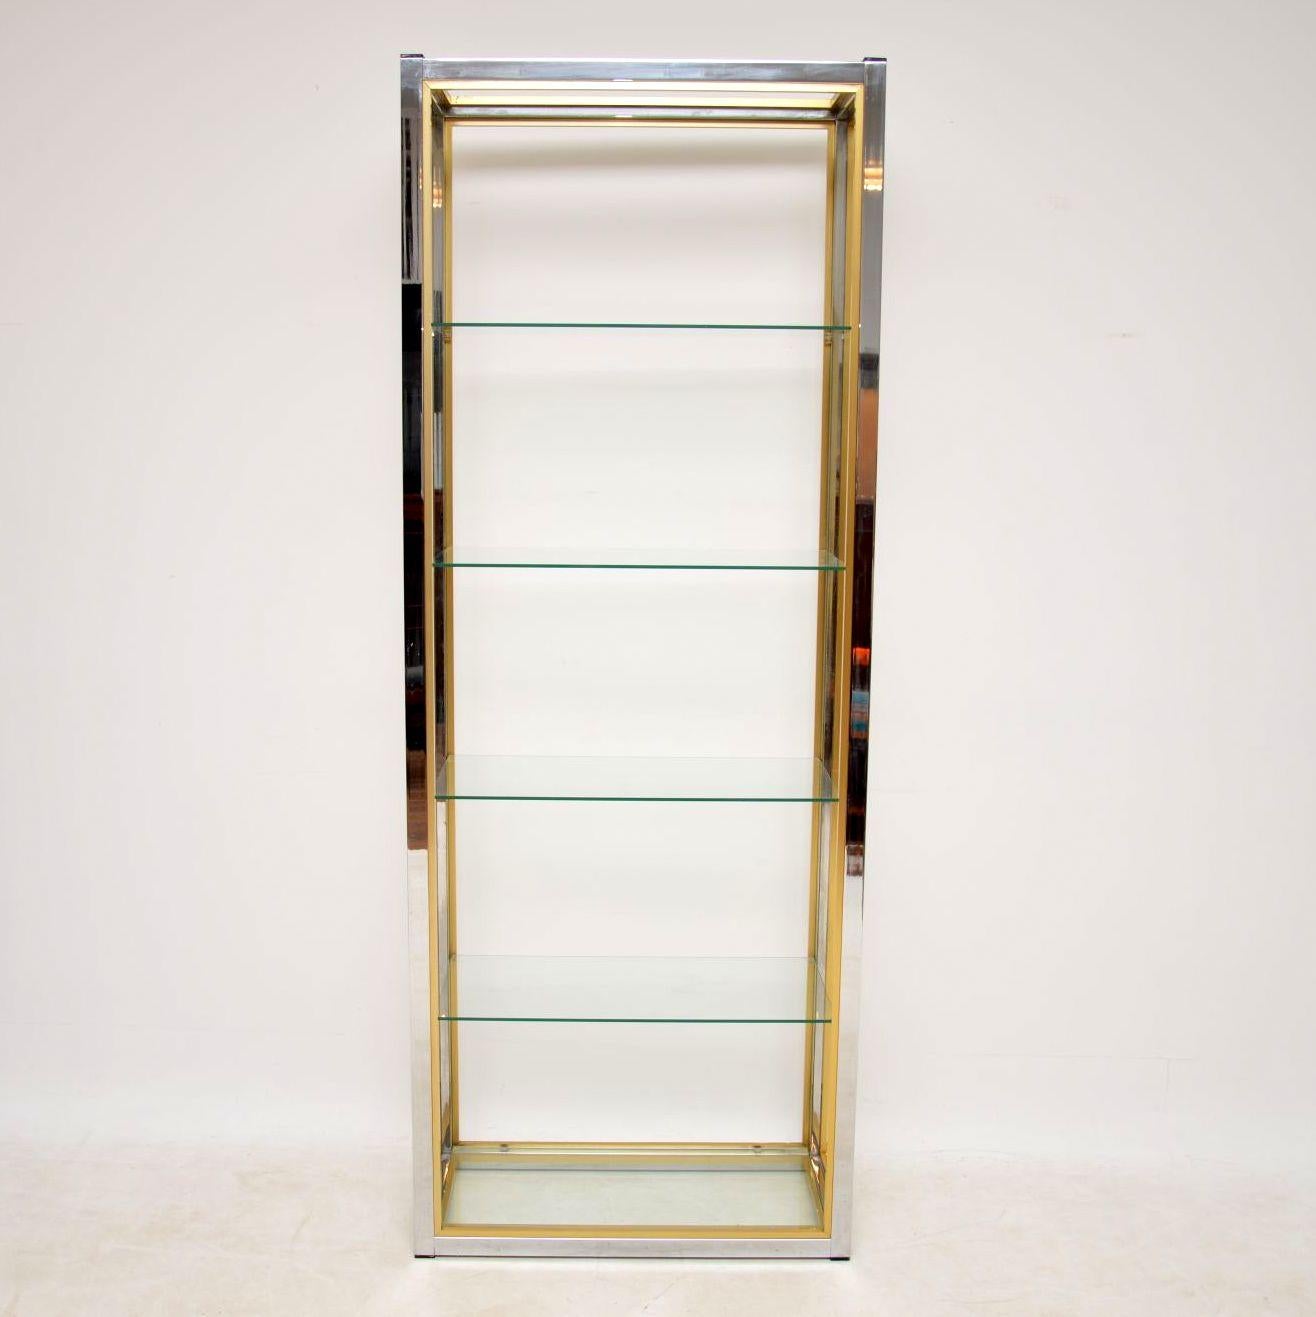 A beautiful vintage display case by Zevi, this was made in Italy in the 1970s. These were originally retailed by Harrods, this one is predominantly chrome, with brass plated aluminium trim. The condition is very good for its age, with only some very